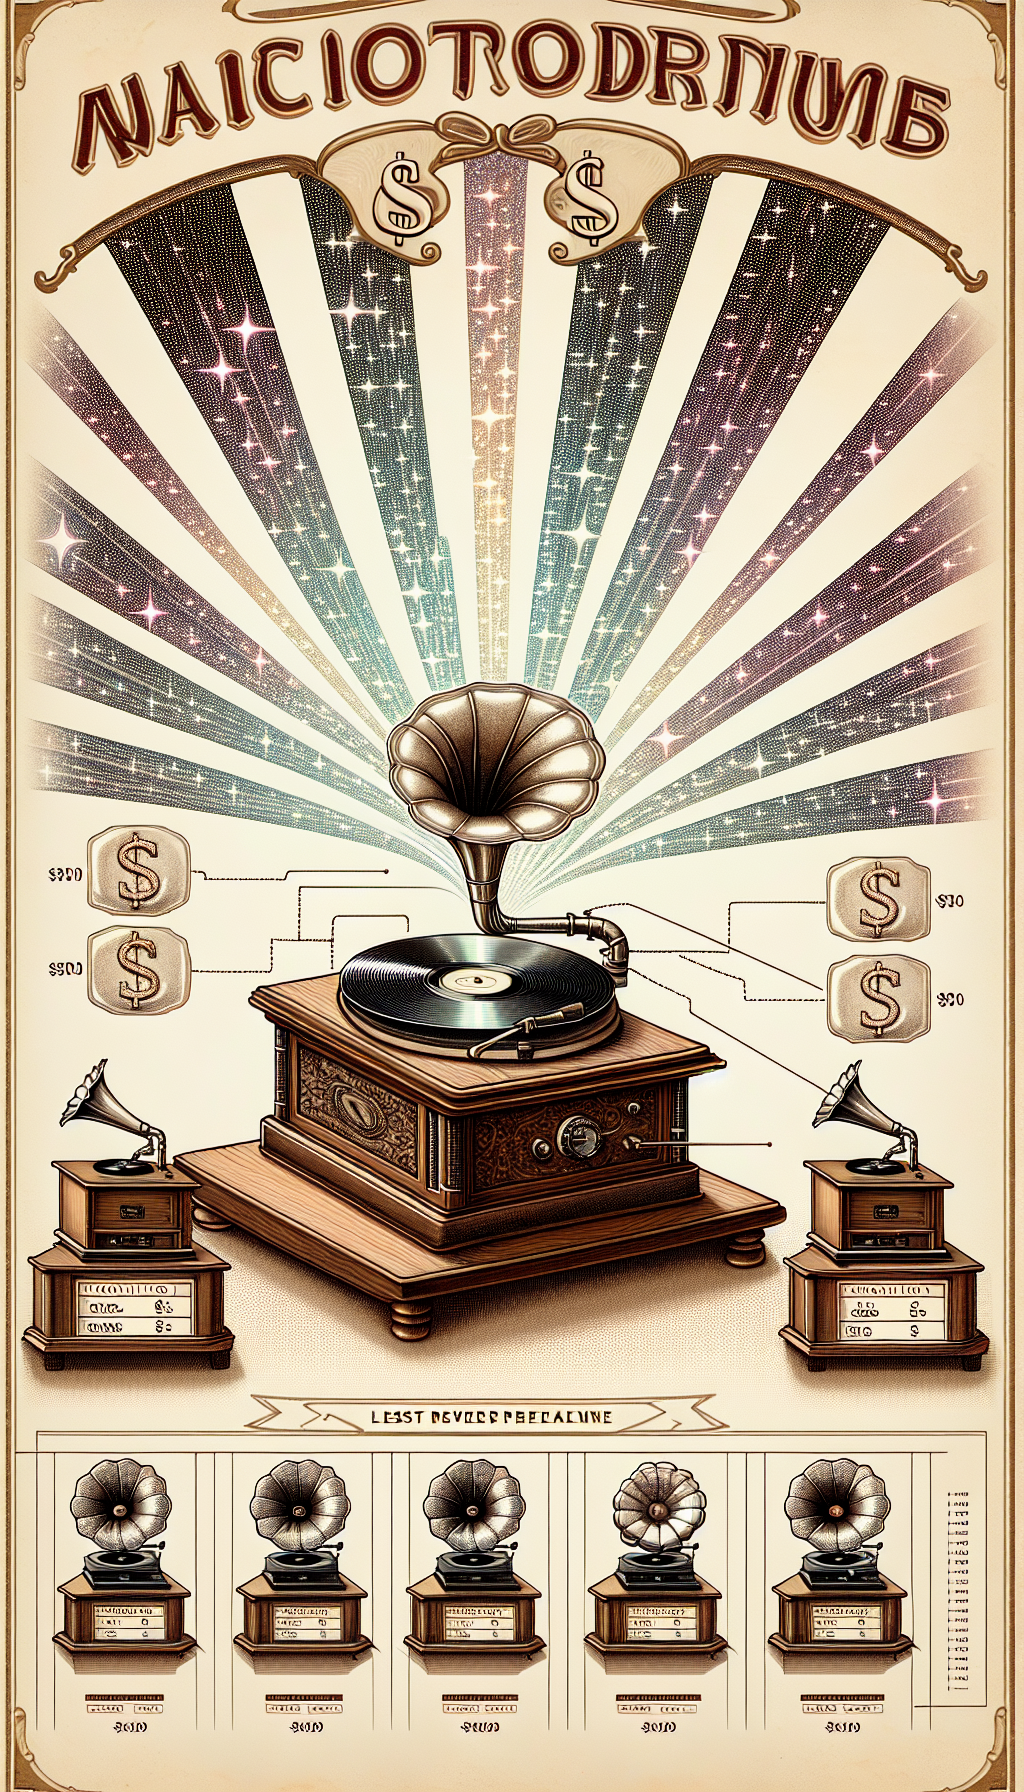 An illustration depicts a gleaming antique Victrola record player with rarity 'rays' - akin to sunbeams - shining out from behind it, each ray labeled with factors affecting scarcity (e.g., production year, condition, model). A transparent overlay of increasing dollar signs symbolizes value growth as these rays extend toward the edges, where less common models are spotlighted on pedestals in varying artistic styles.